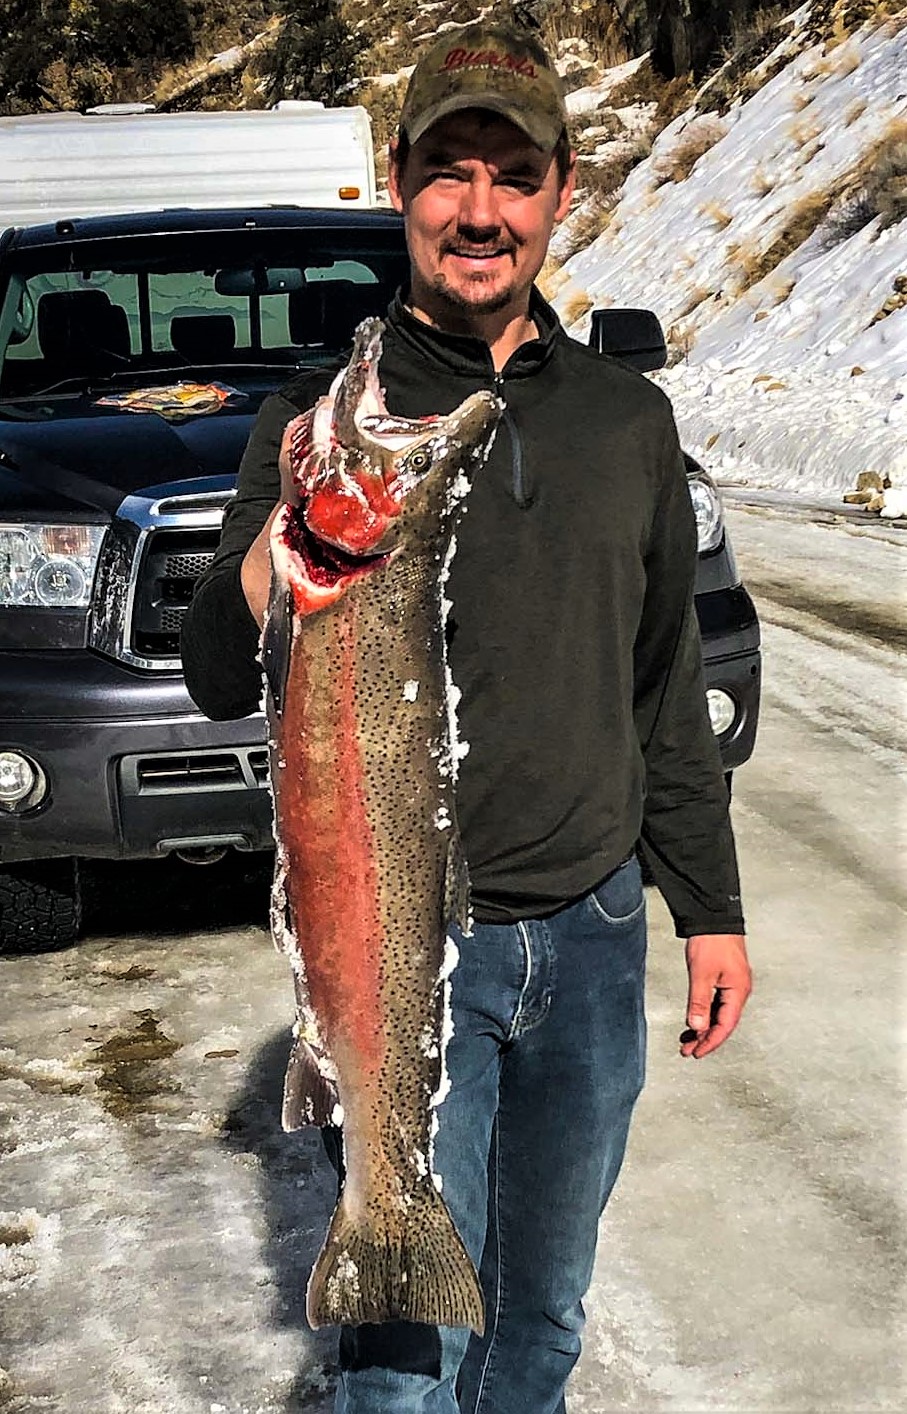 March 8 Upper Salmon steelhead report: Ice out on the river